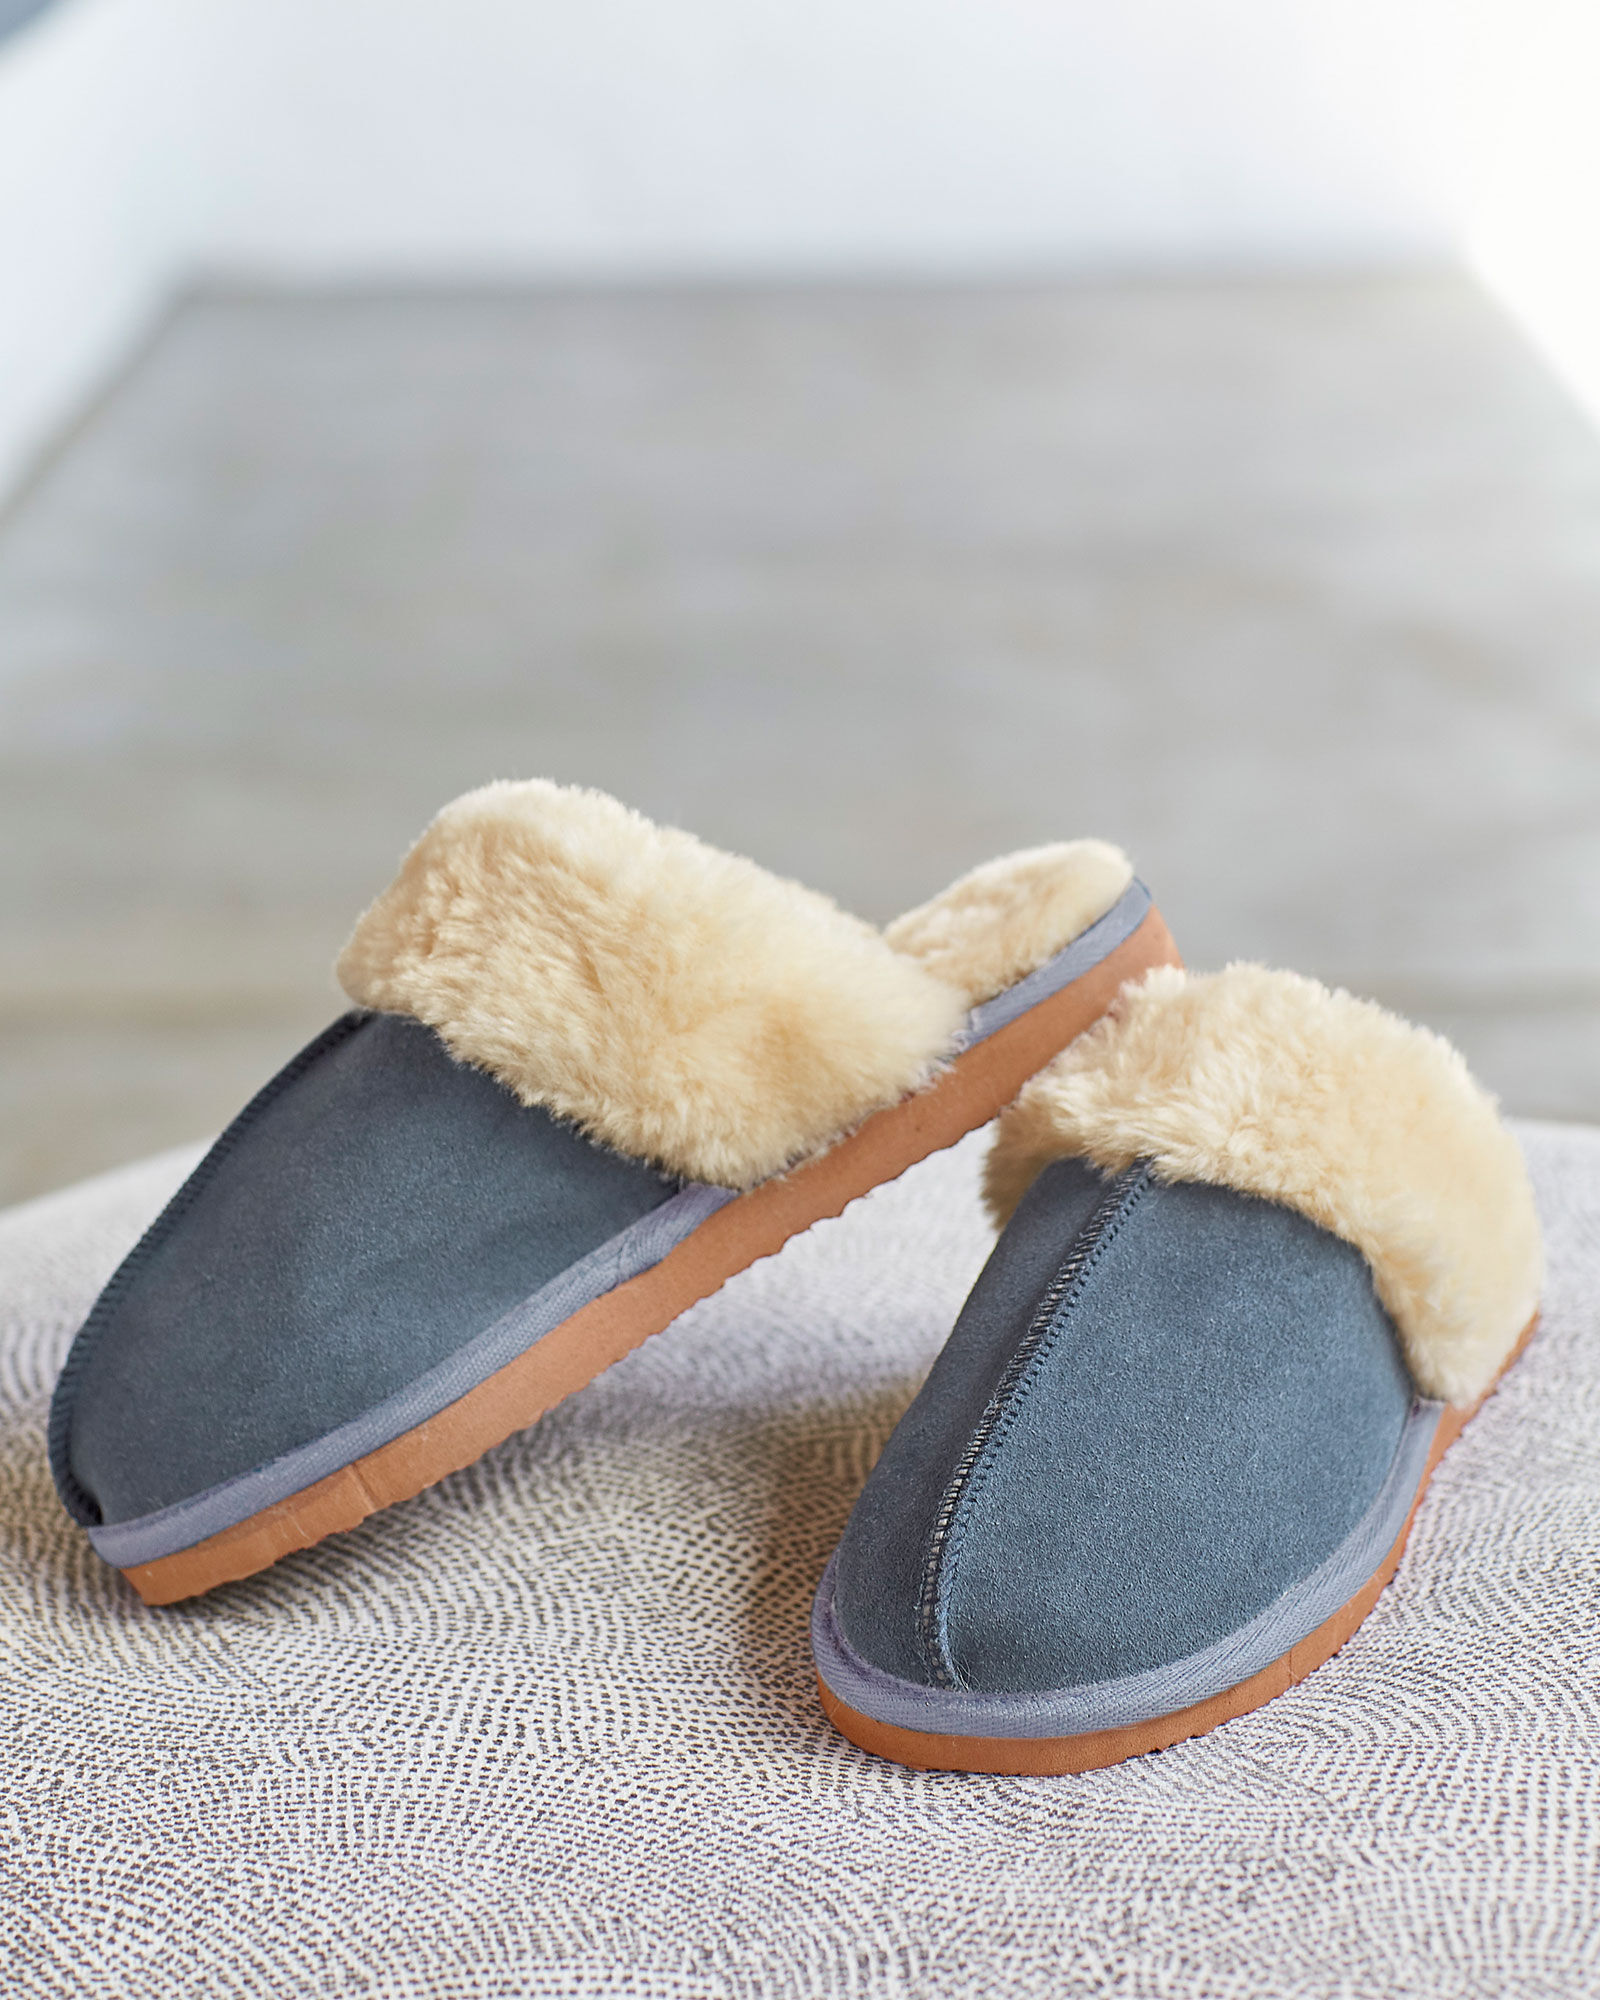 cotton traders mens slippers